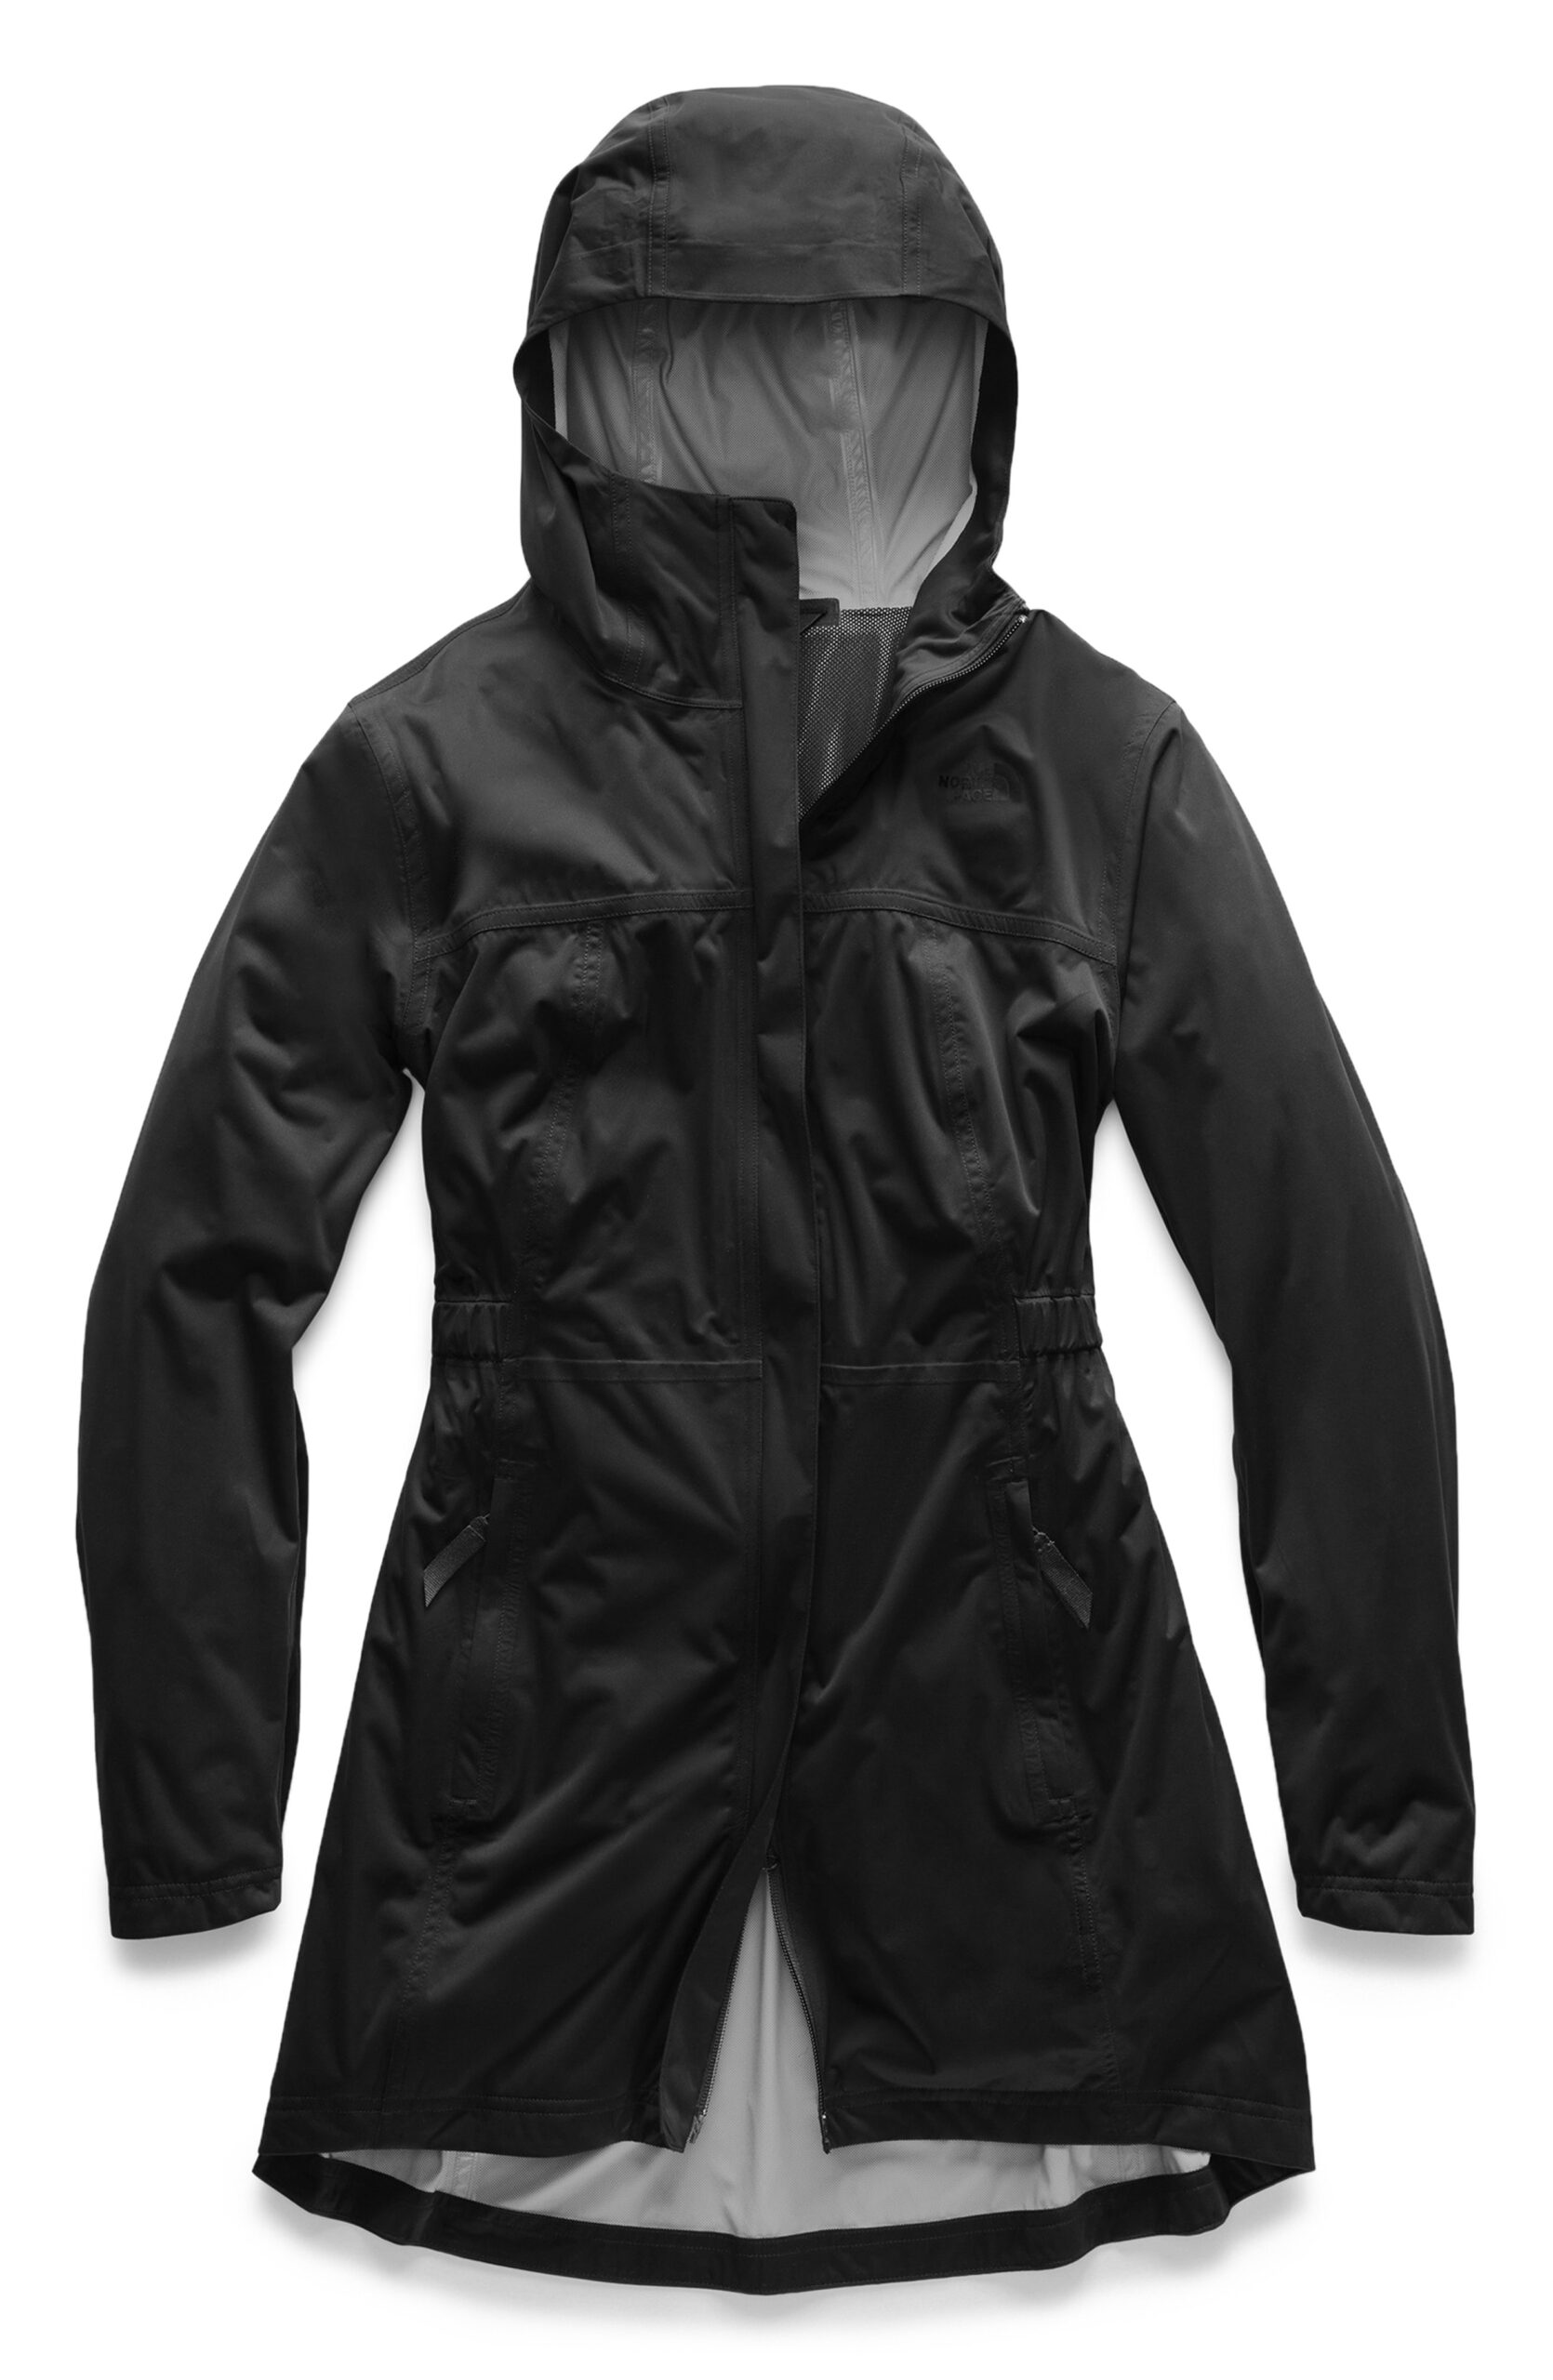 Jackets that protects you from
winter:  waterproof coat